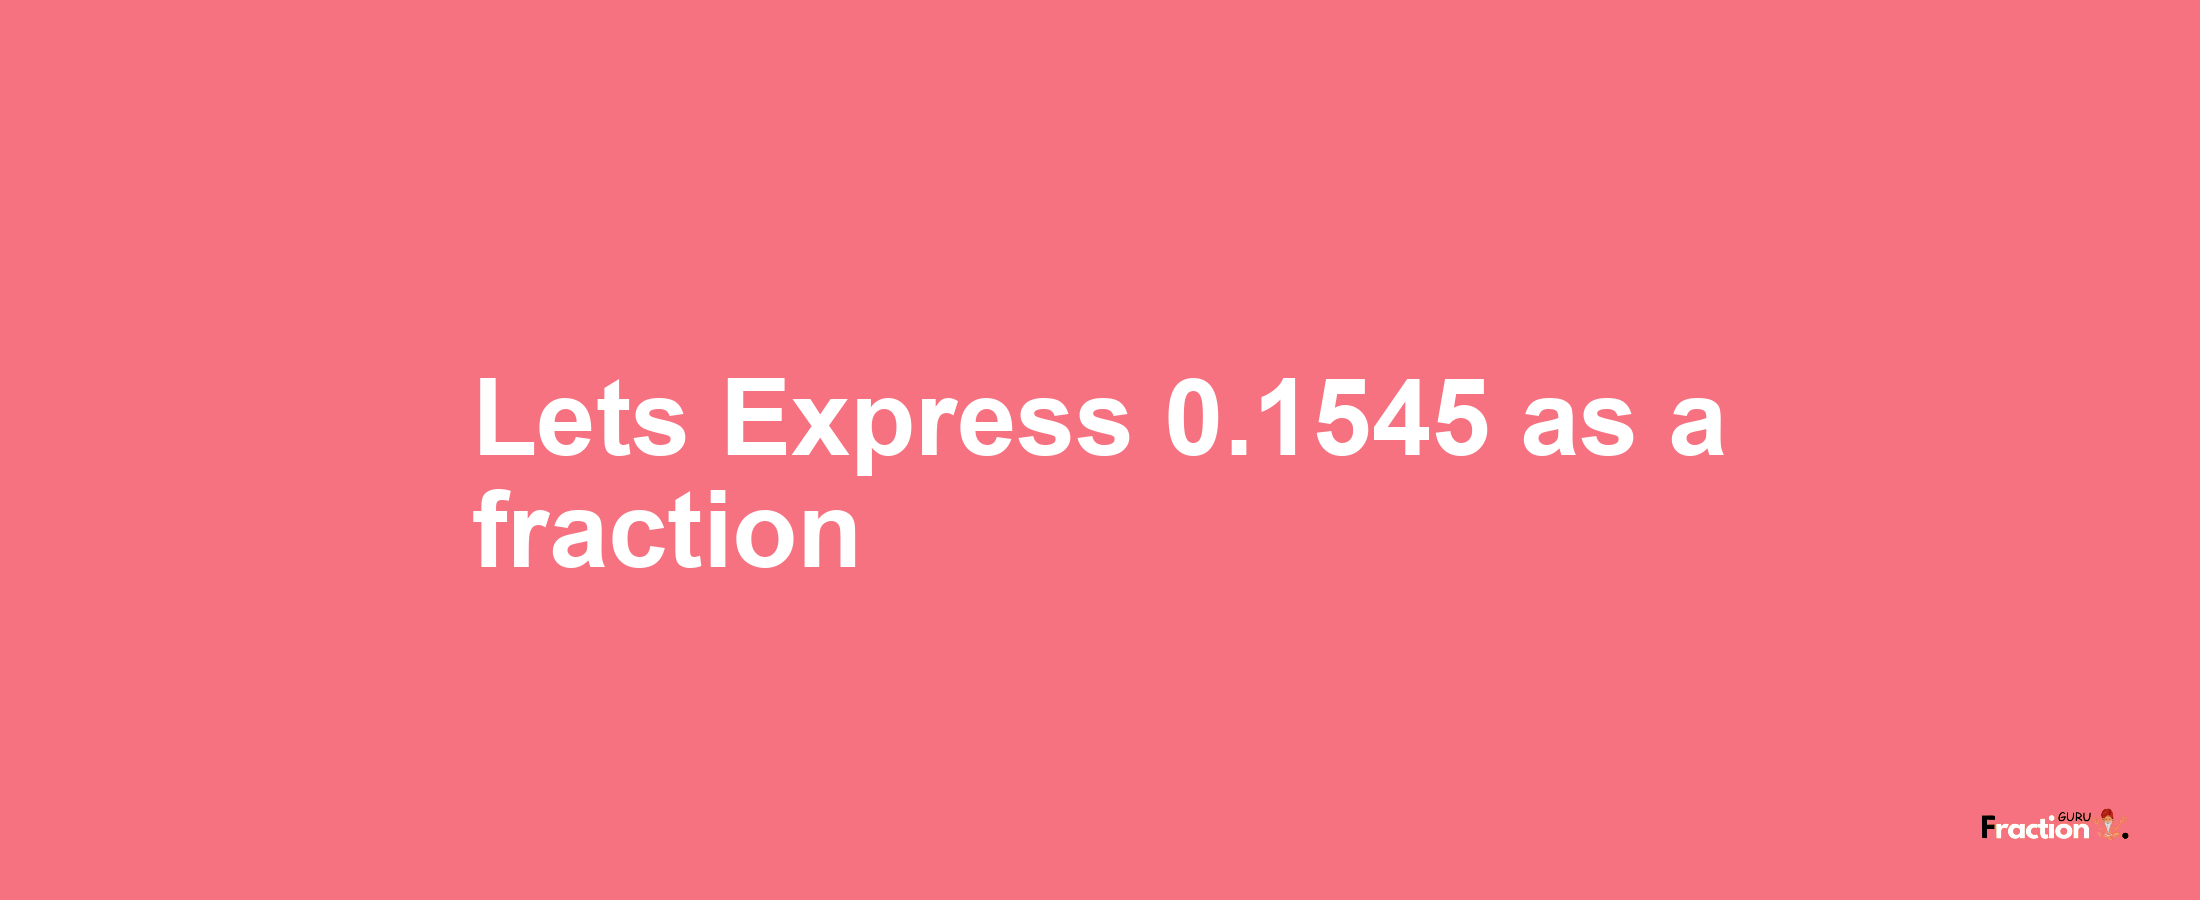 Lets Express 0.1545 as afraction